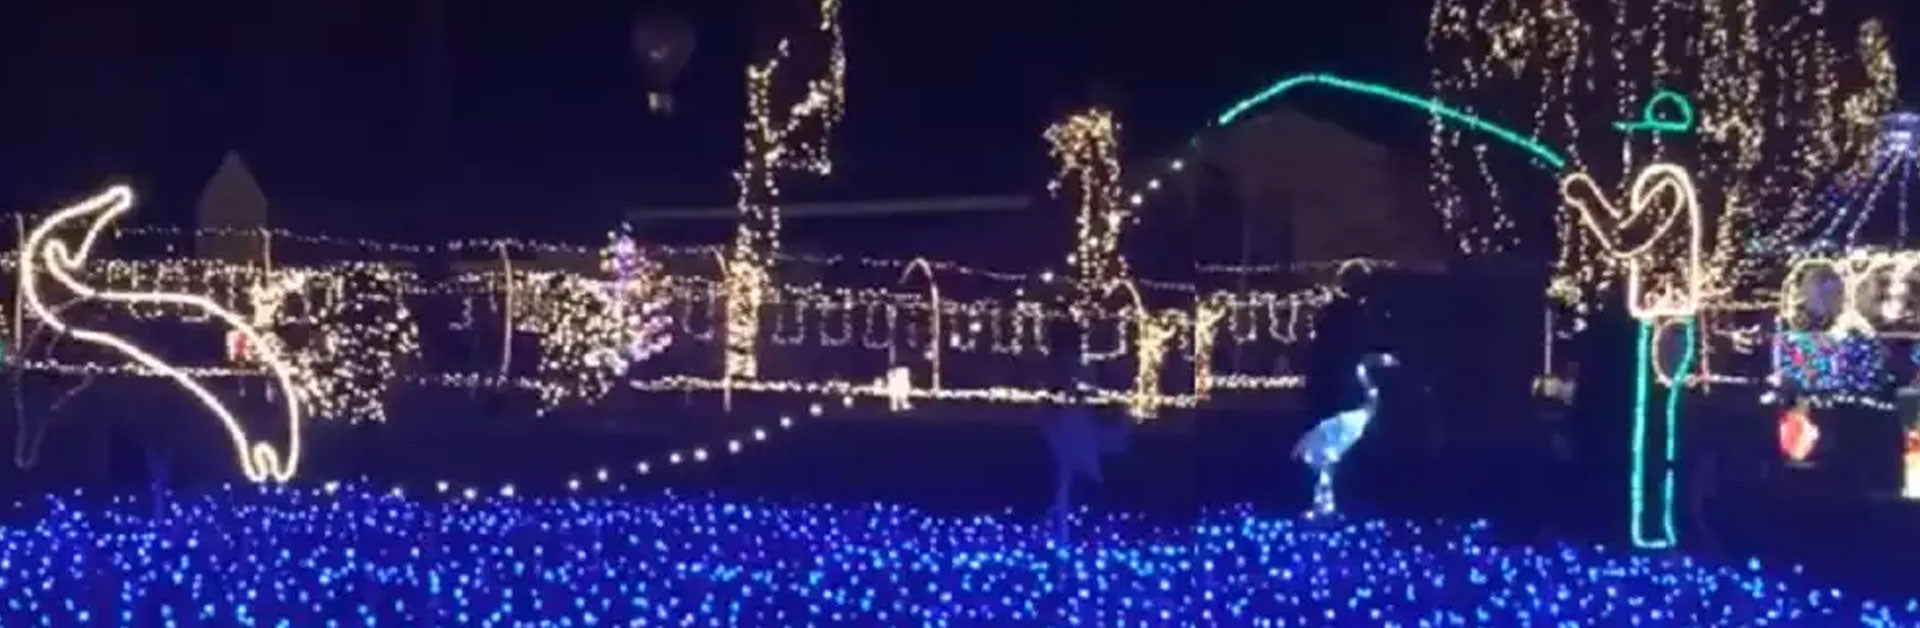 These Might Be The Best Christmas Lights Ever